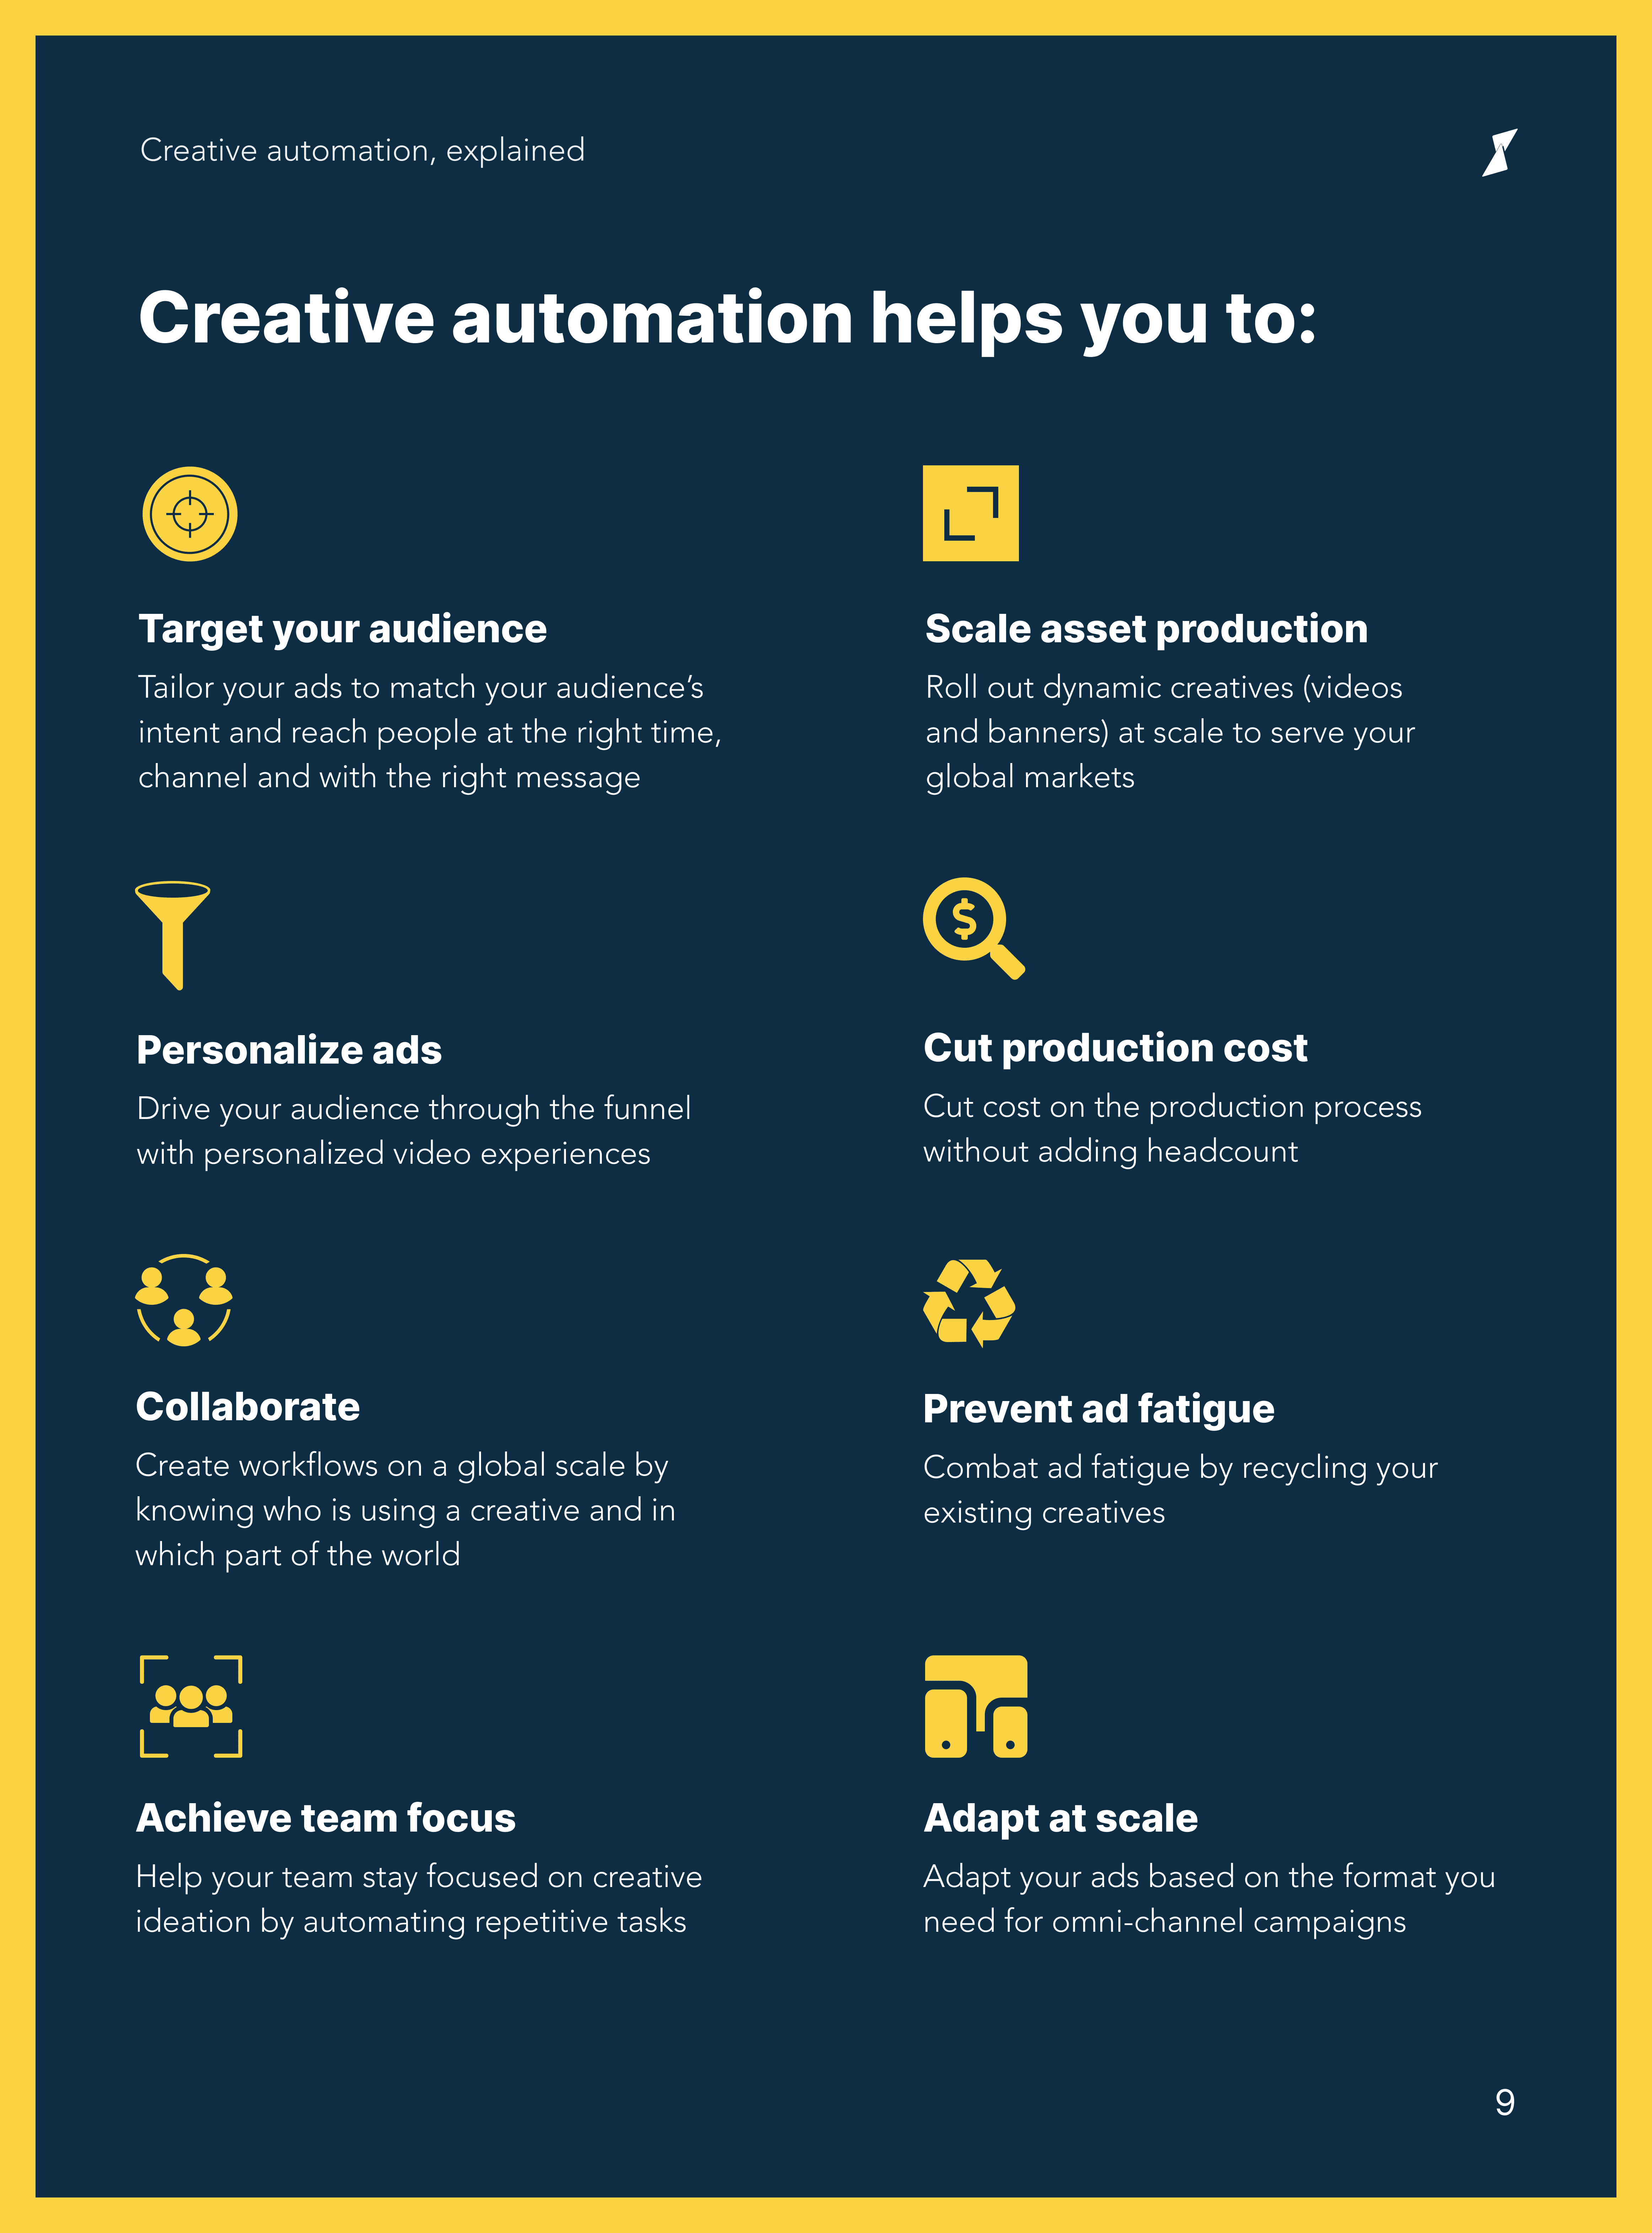 Creative Automation helps you to: - Target your audience - Personalize ads - Collaborate - Achieve team focus - Scale asset production - Cut production cost - Prevent ad fatigue - Adapt at scale